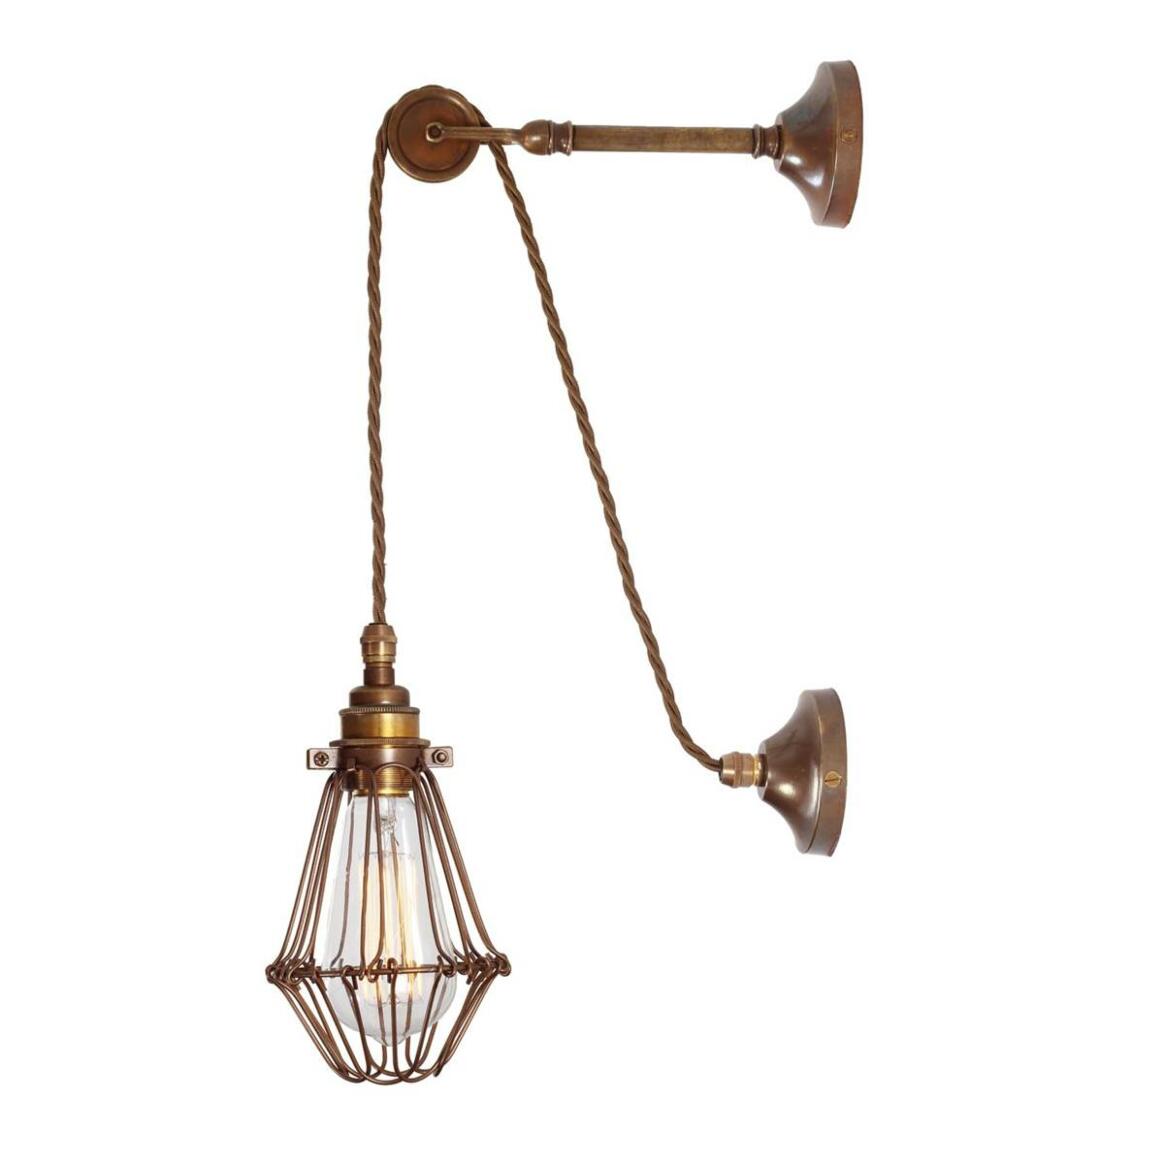 Apoch Vintage Pulley Cage Wall Light main product image